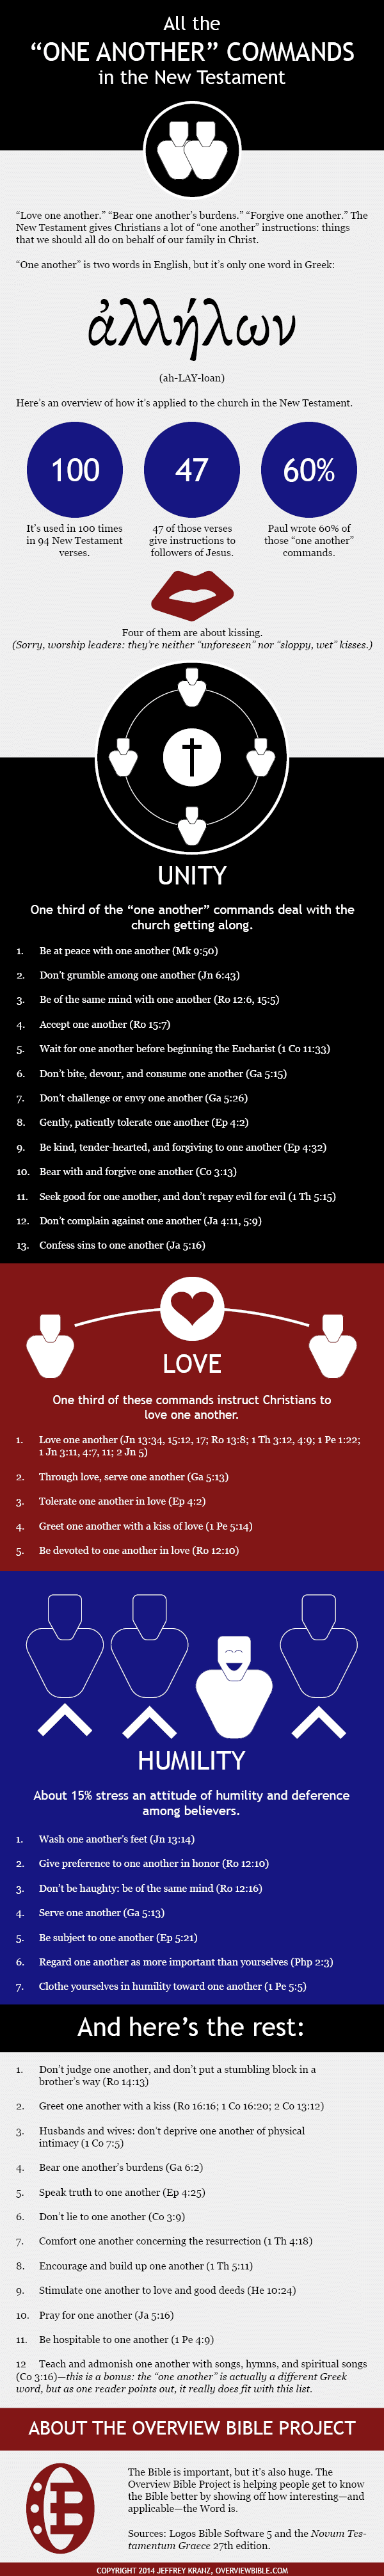 one-another-commands-in-new-testament.infographic5